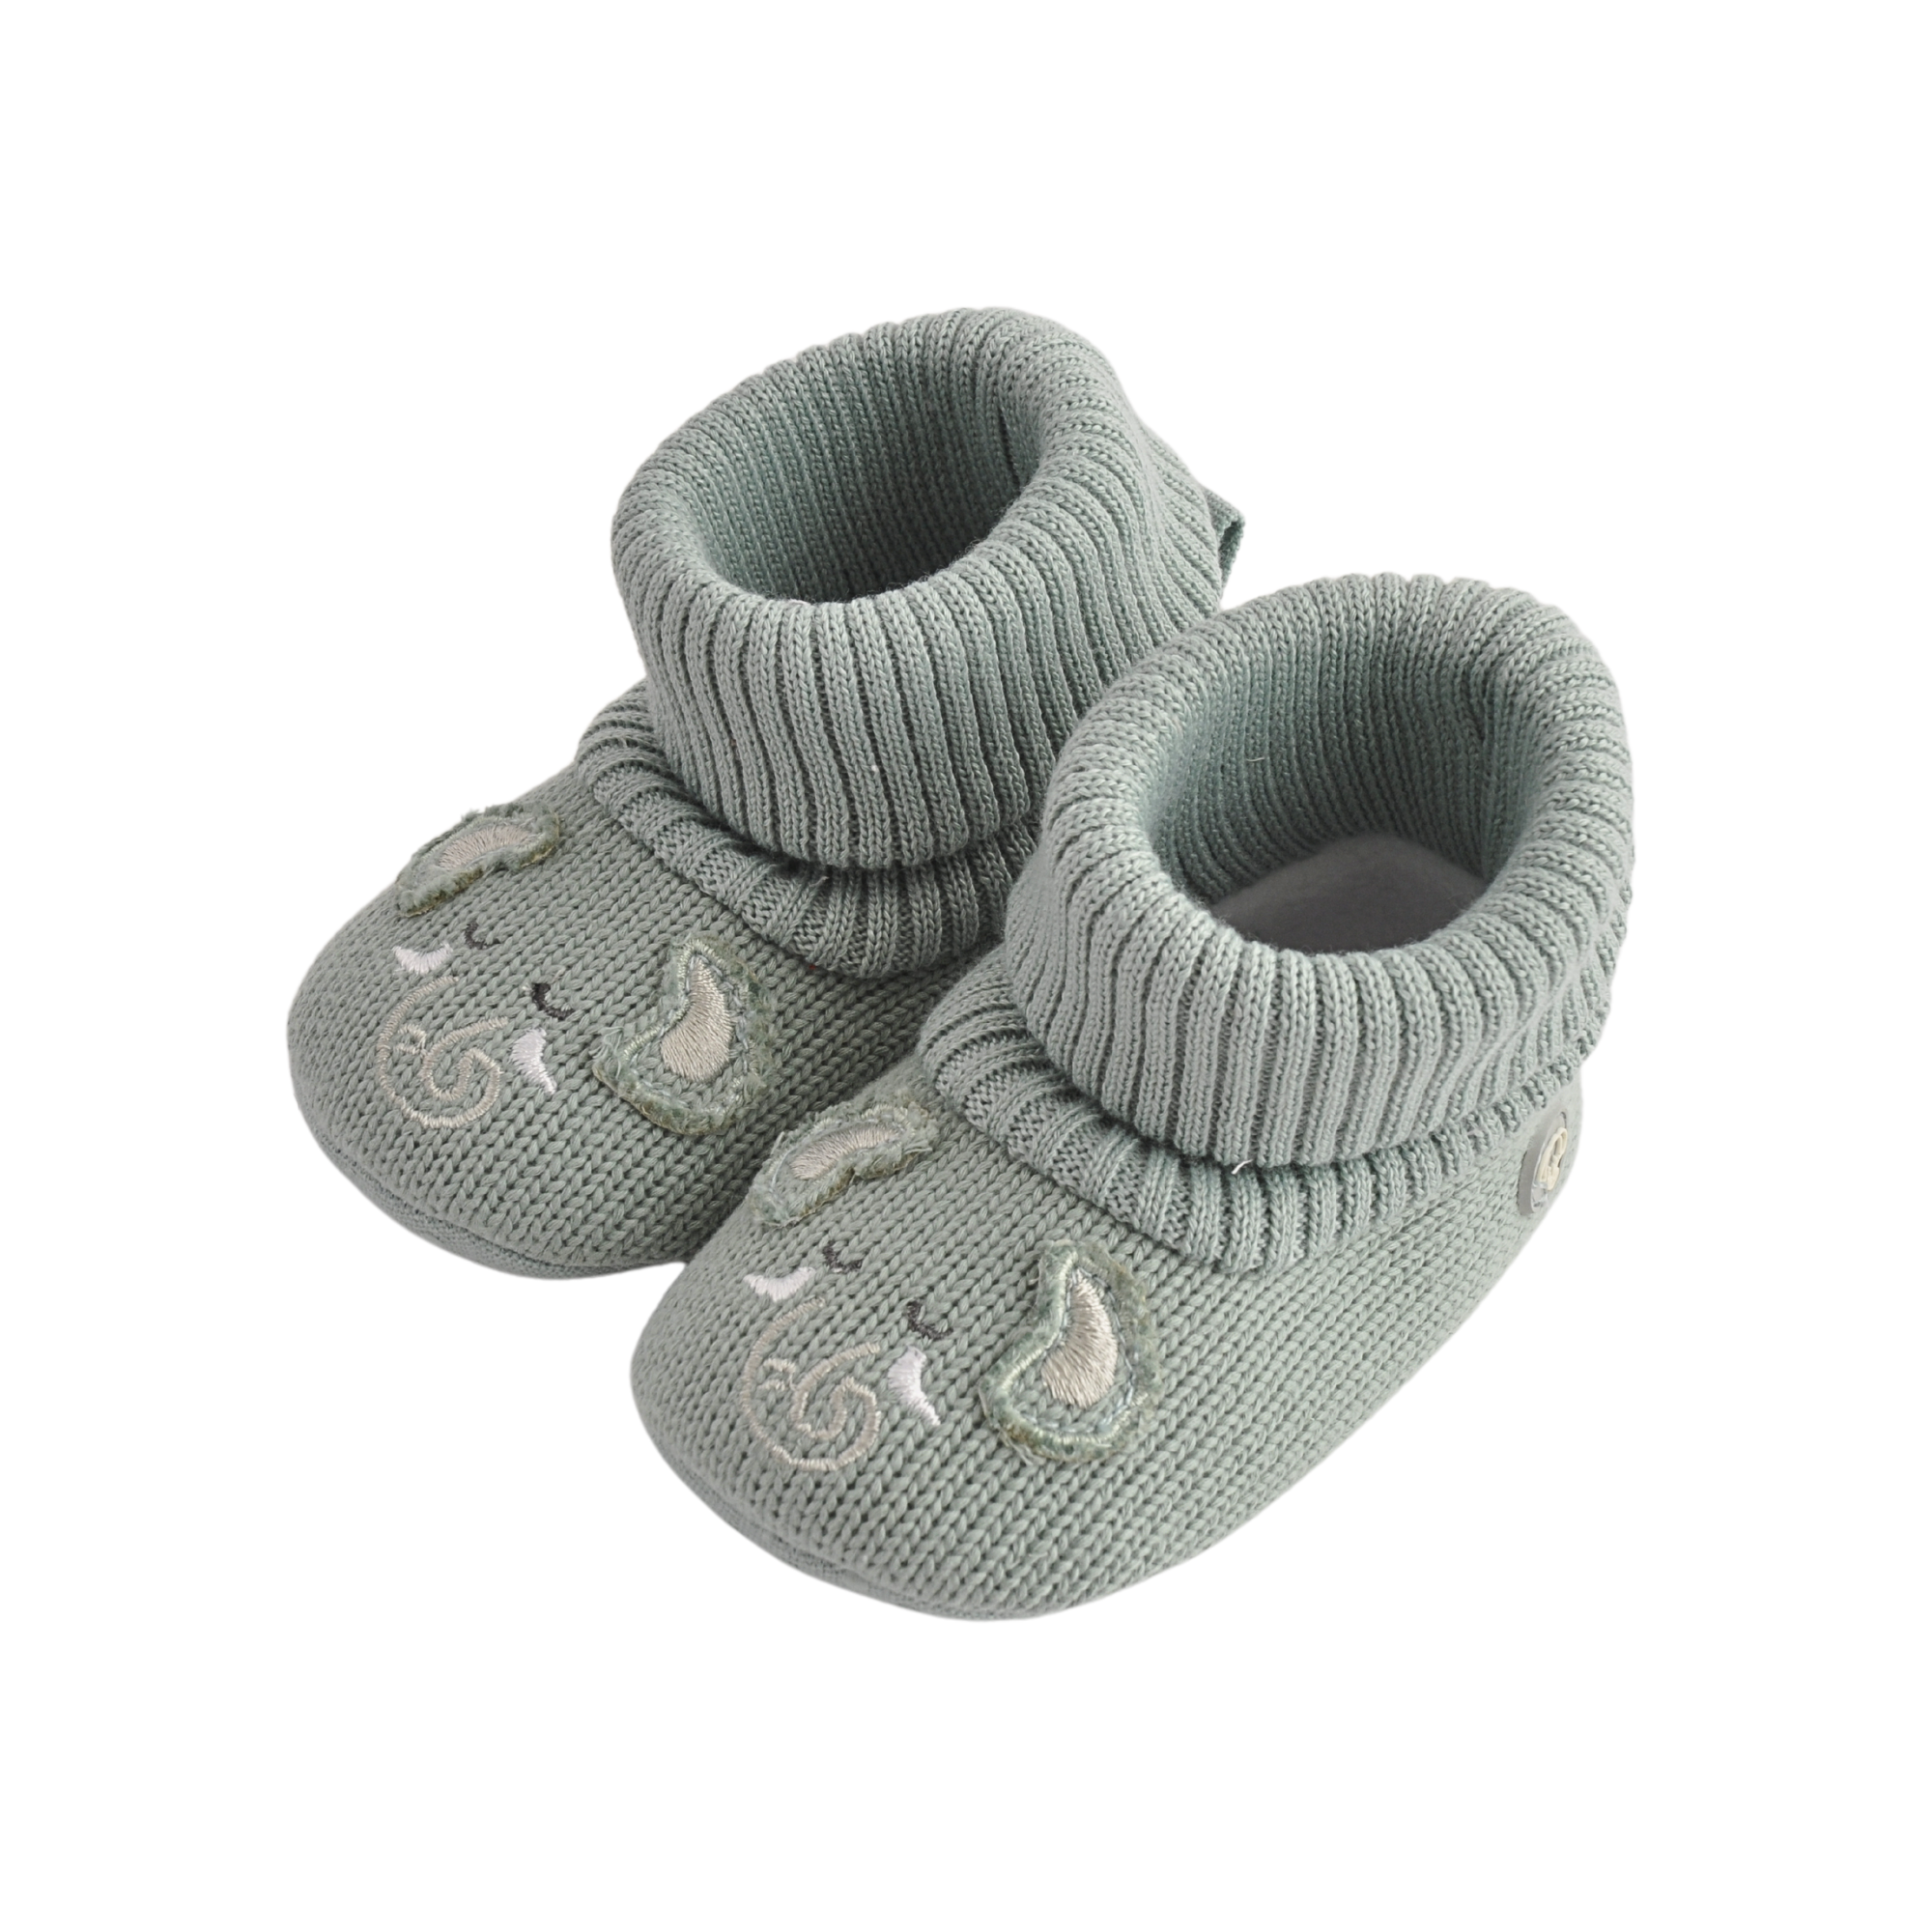 Baby Novelty Knitted Booties 6-12M - Elephant